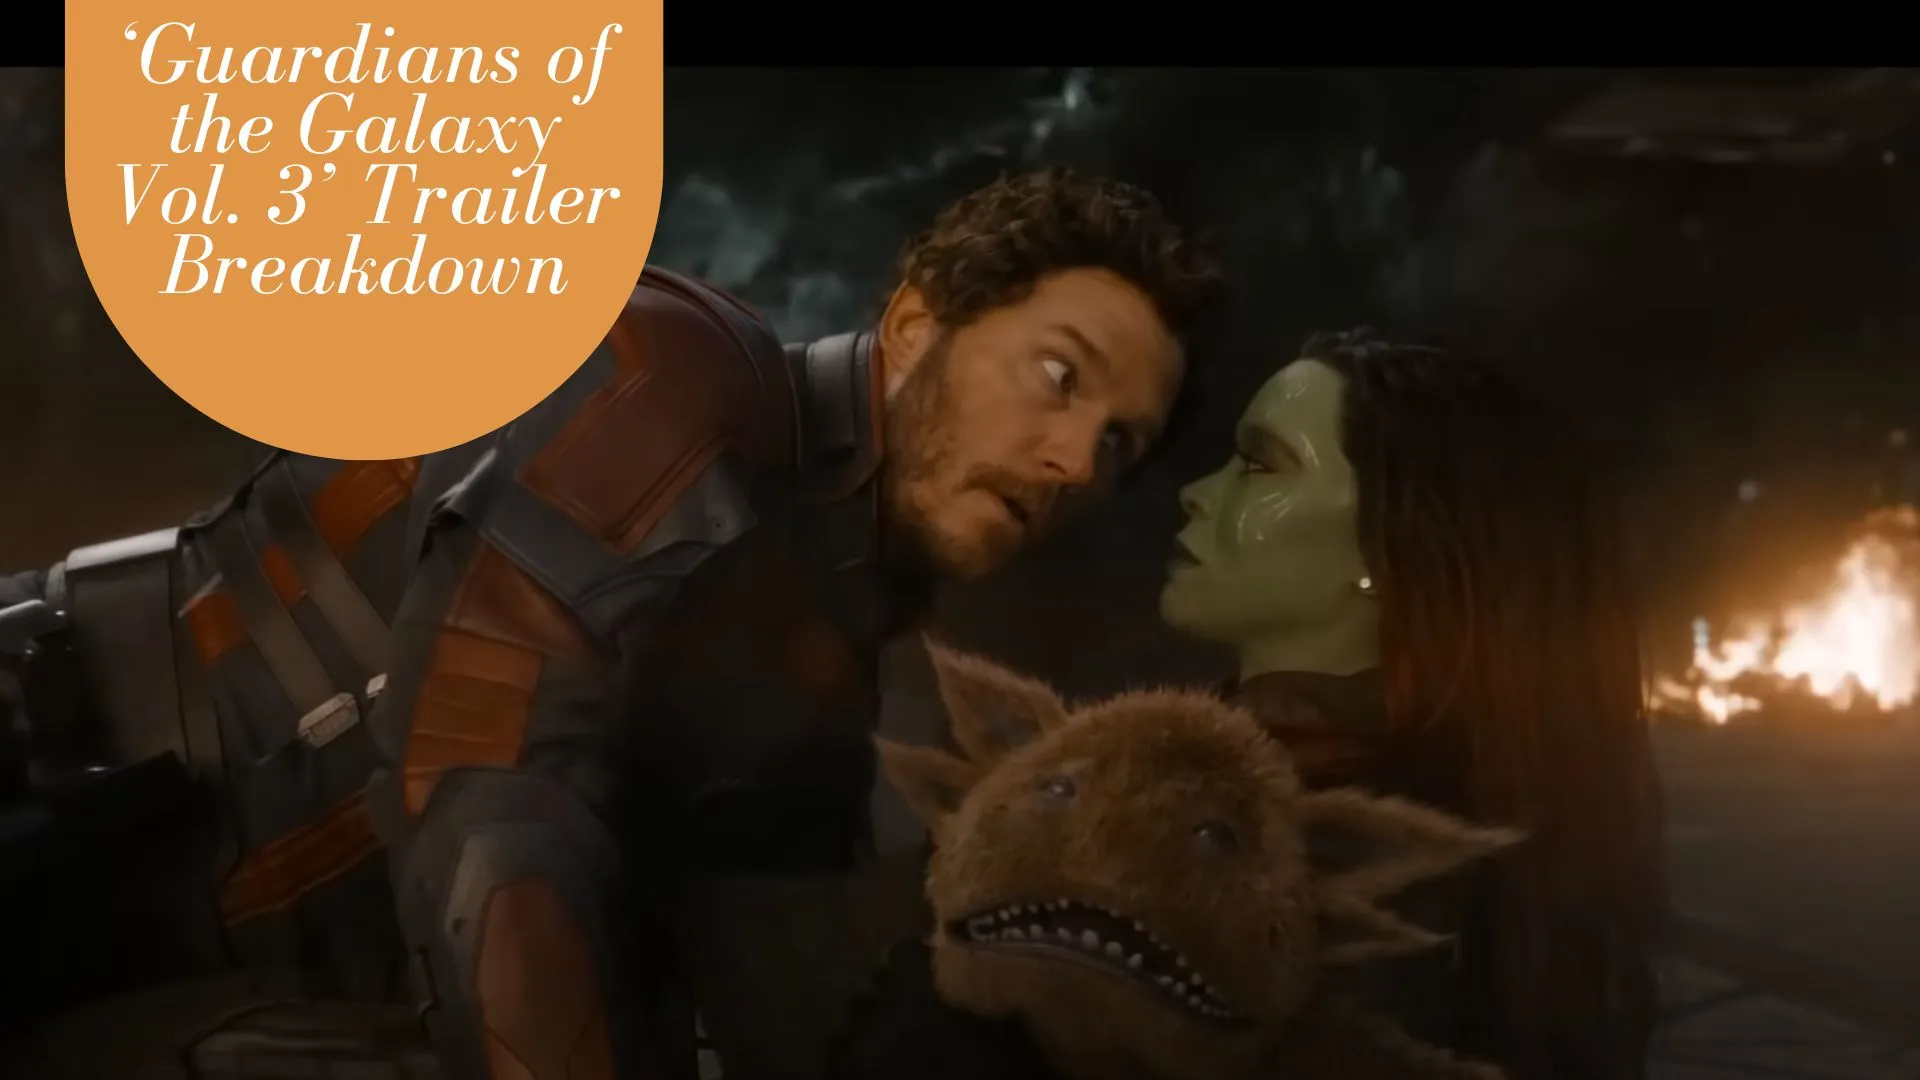 ‘Guardians of the Galaxy Vol. 3’ Trailer Breakdown (Image credit: youtube)